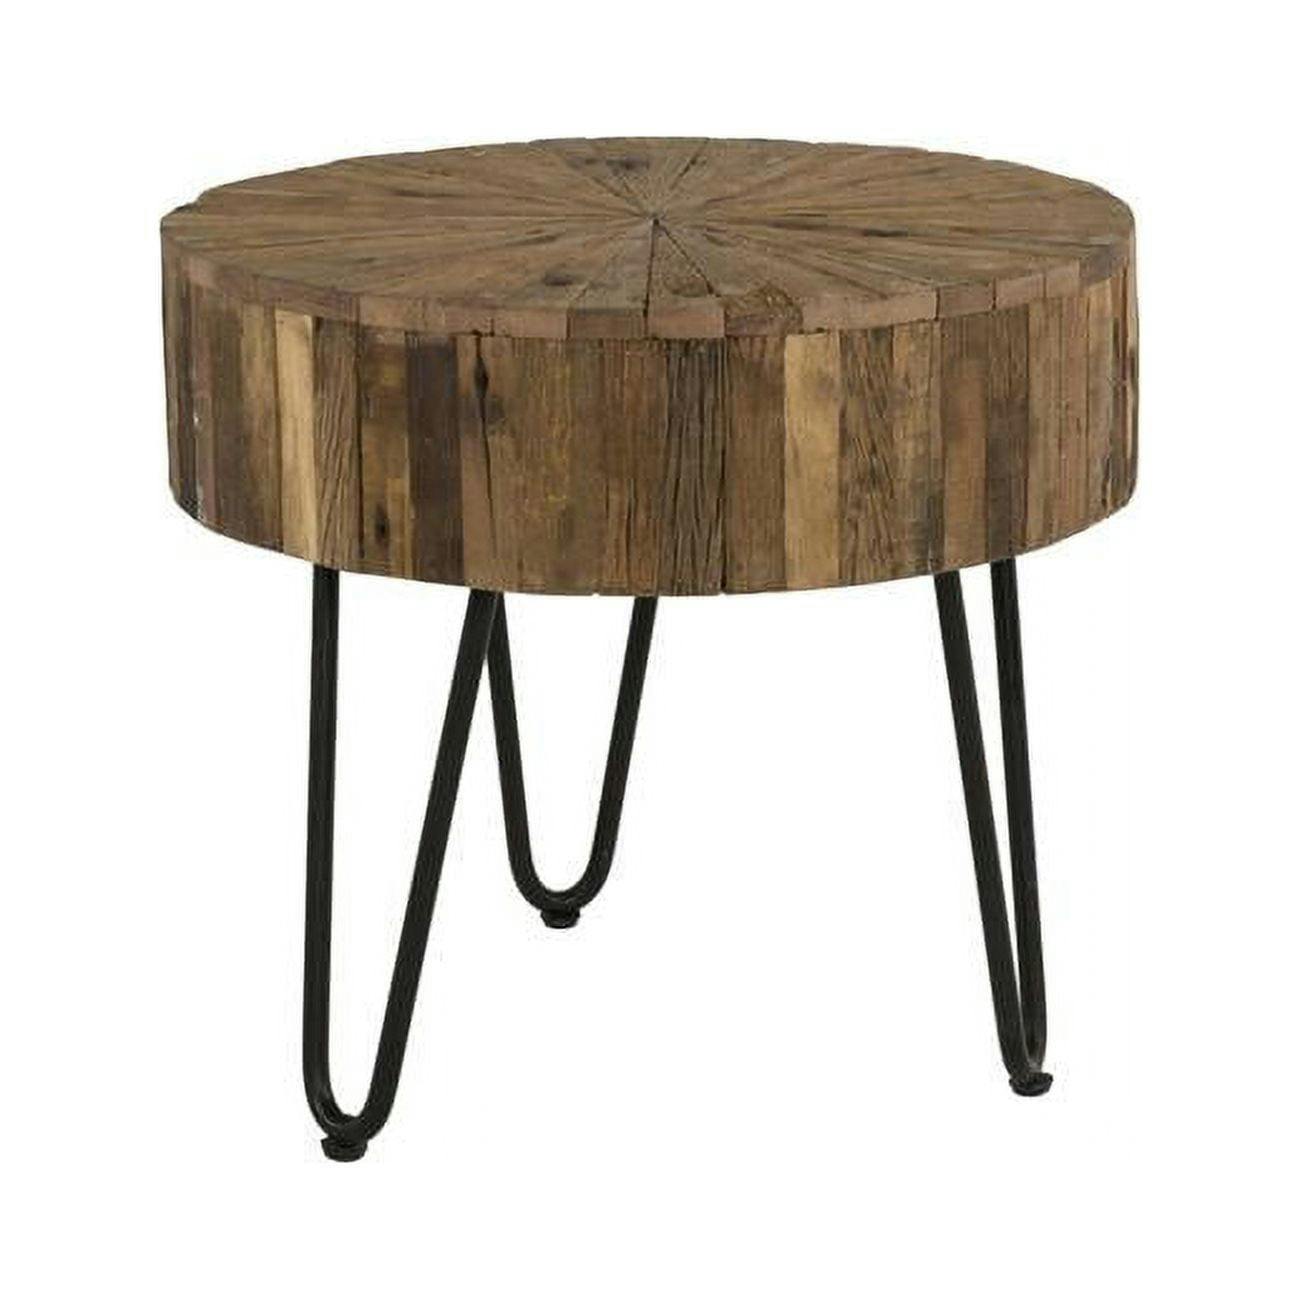 22" Rustic Reclaimed Wood Round End Table with Iron Hairpin Legs